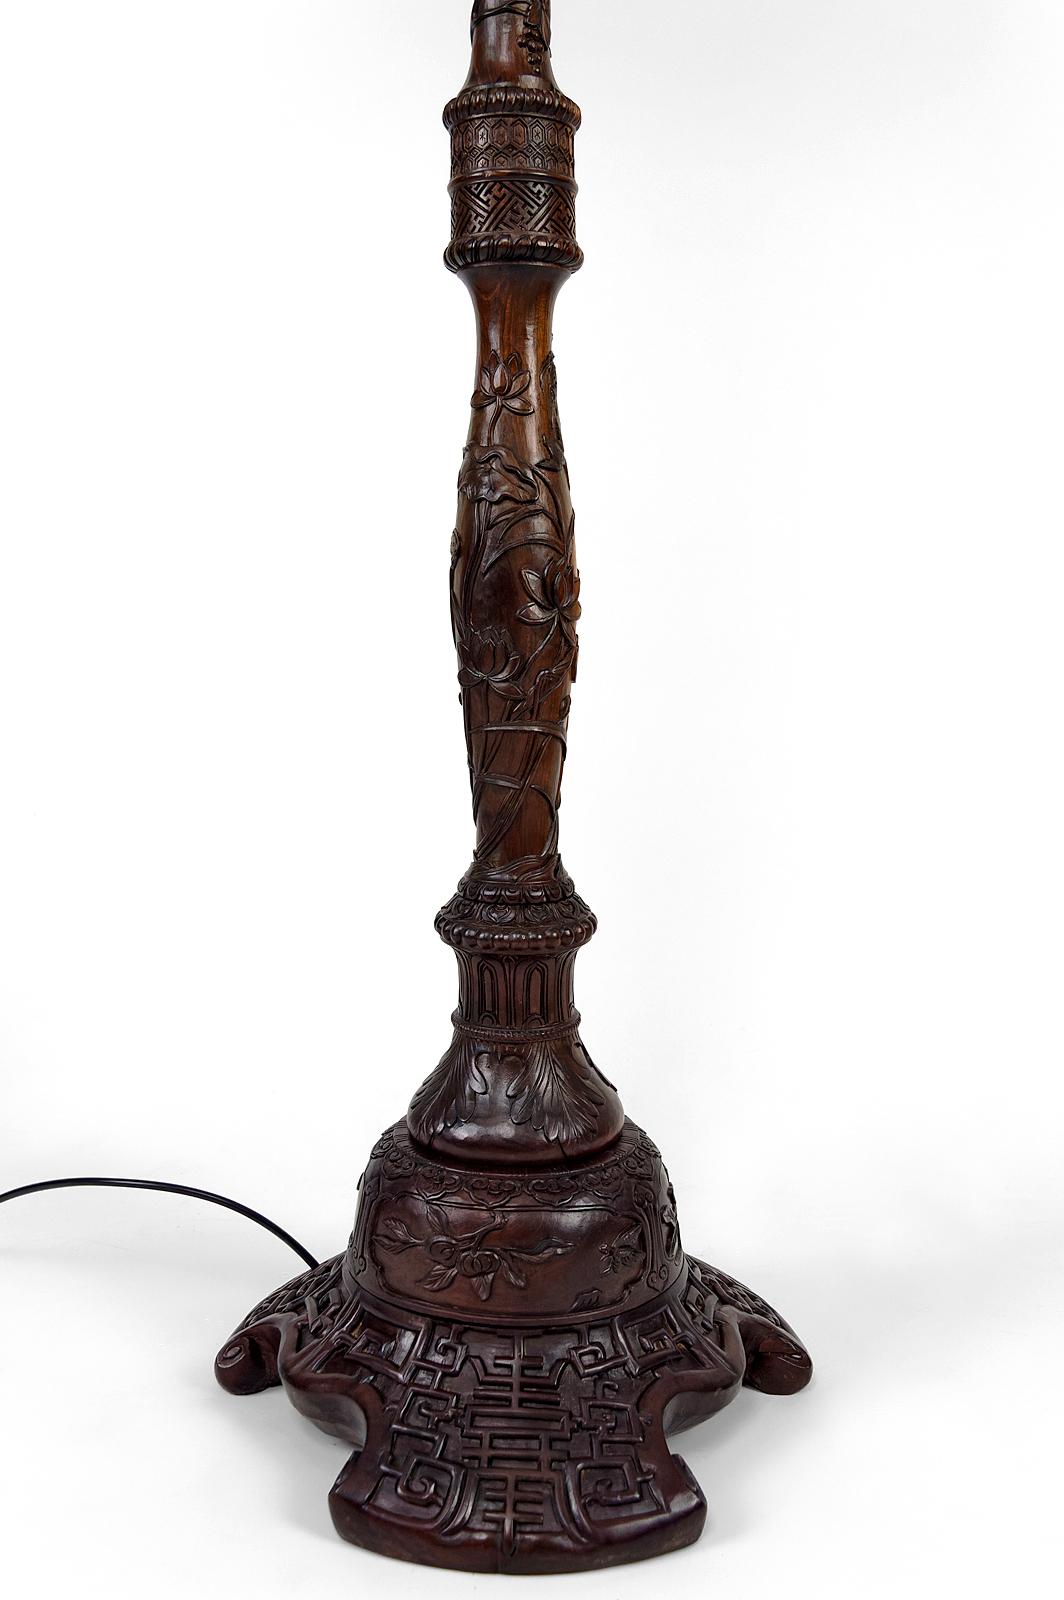 Antique Asian carved wooden floor lamp, Indochina or China, circa 1900 10